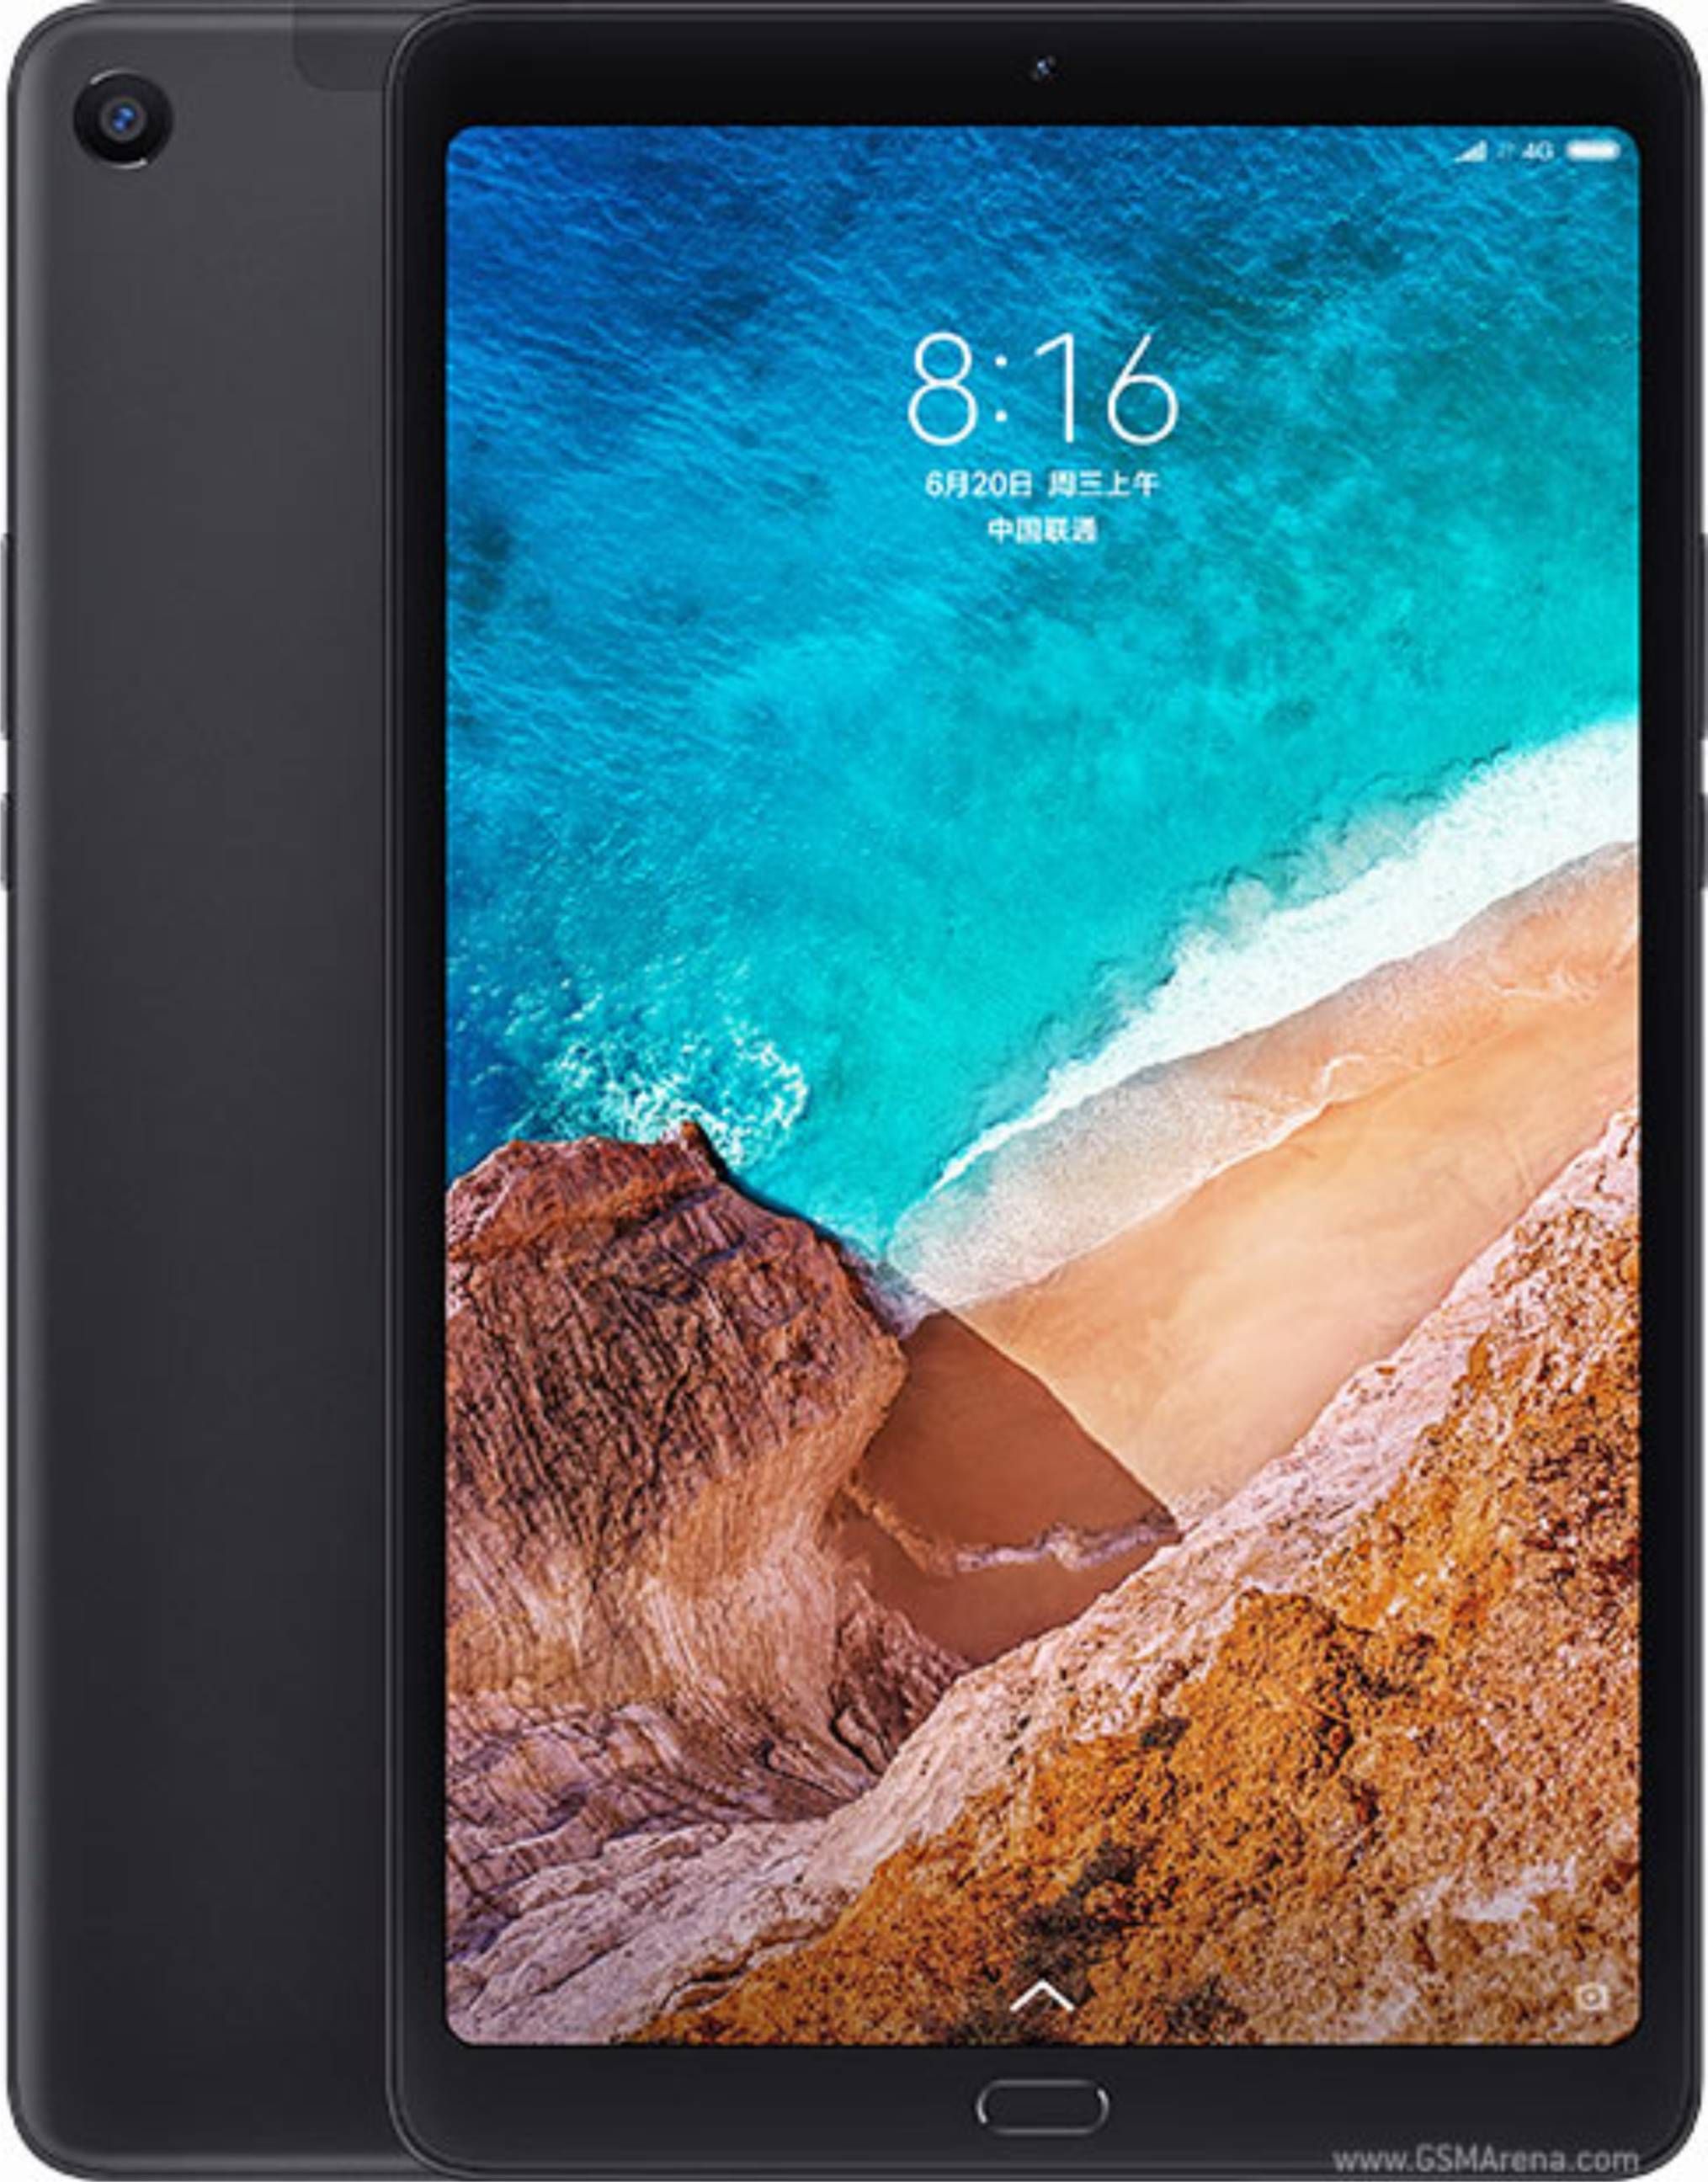     Xiaomi Mi Pad 4 Plus Specifications and Price in Kenya  Xiaomi Mi Pad 4 Plus Specifications and Price in Kenya